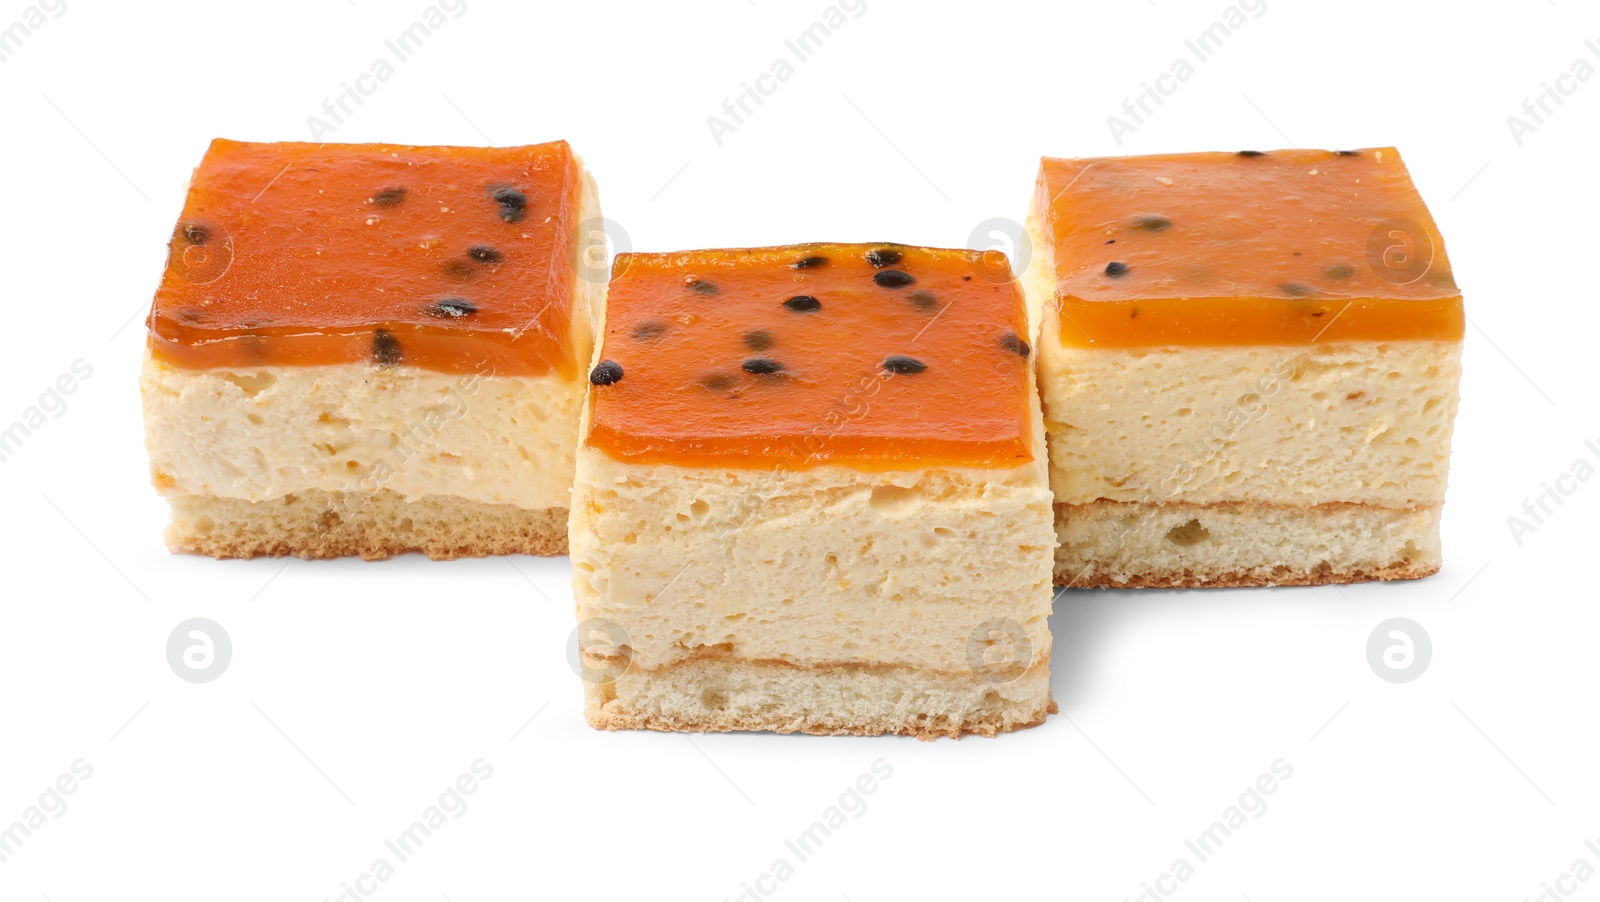 Photo of Pieces of cheesecake with jelly on white background